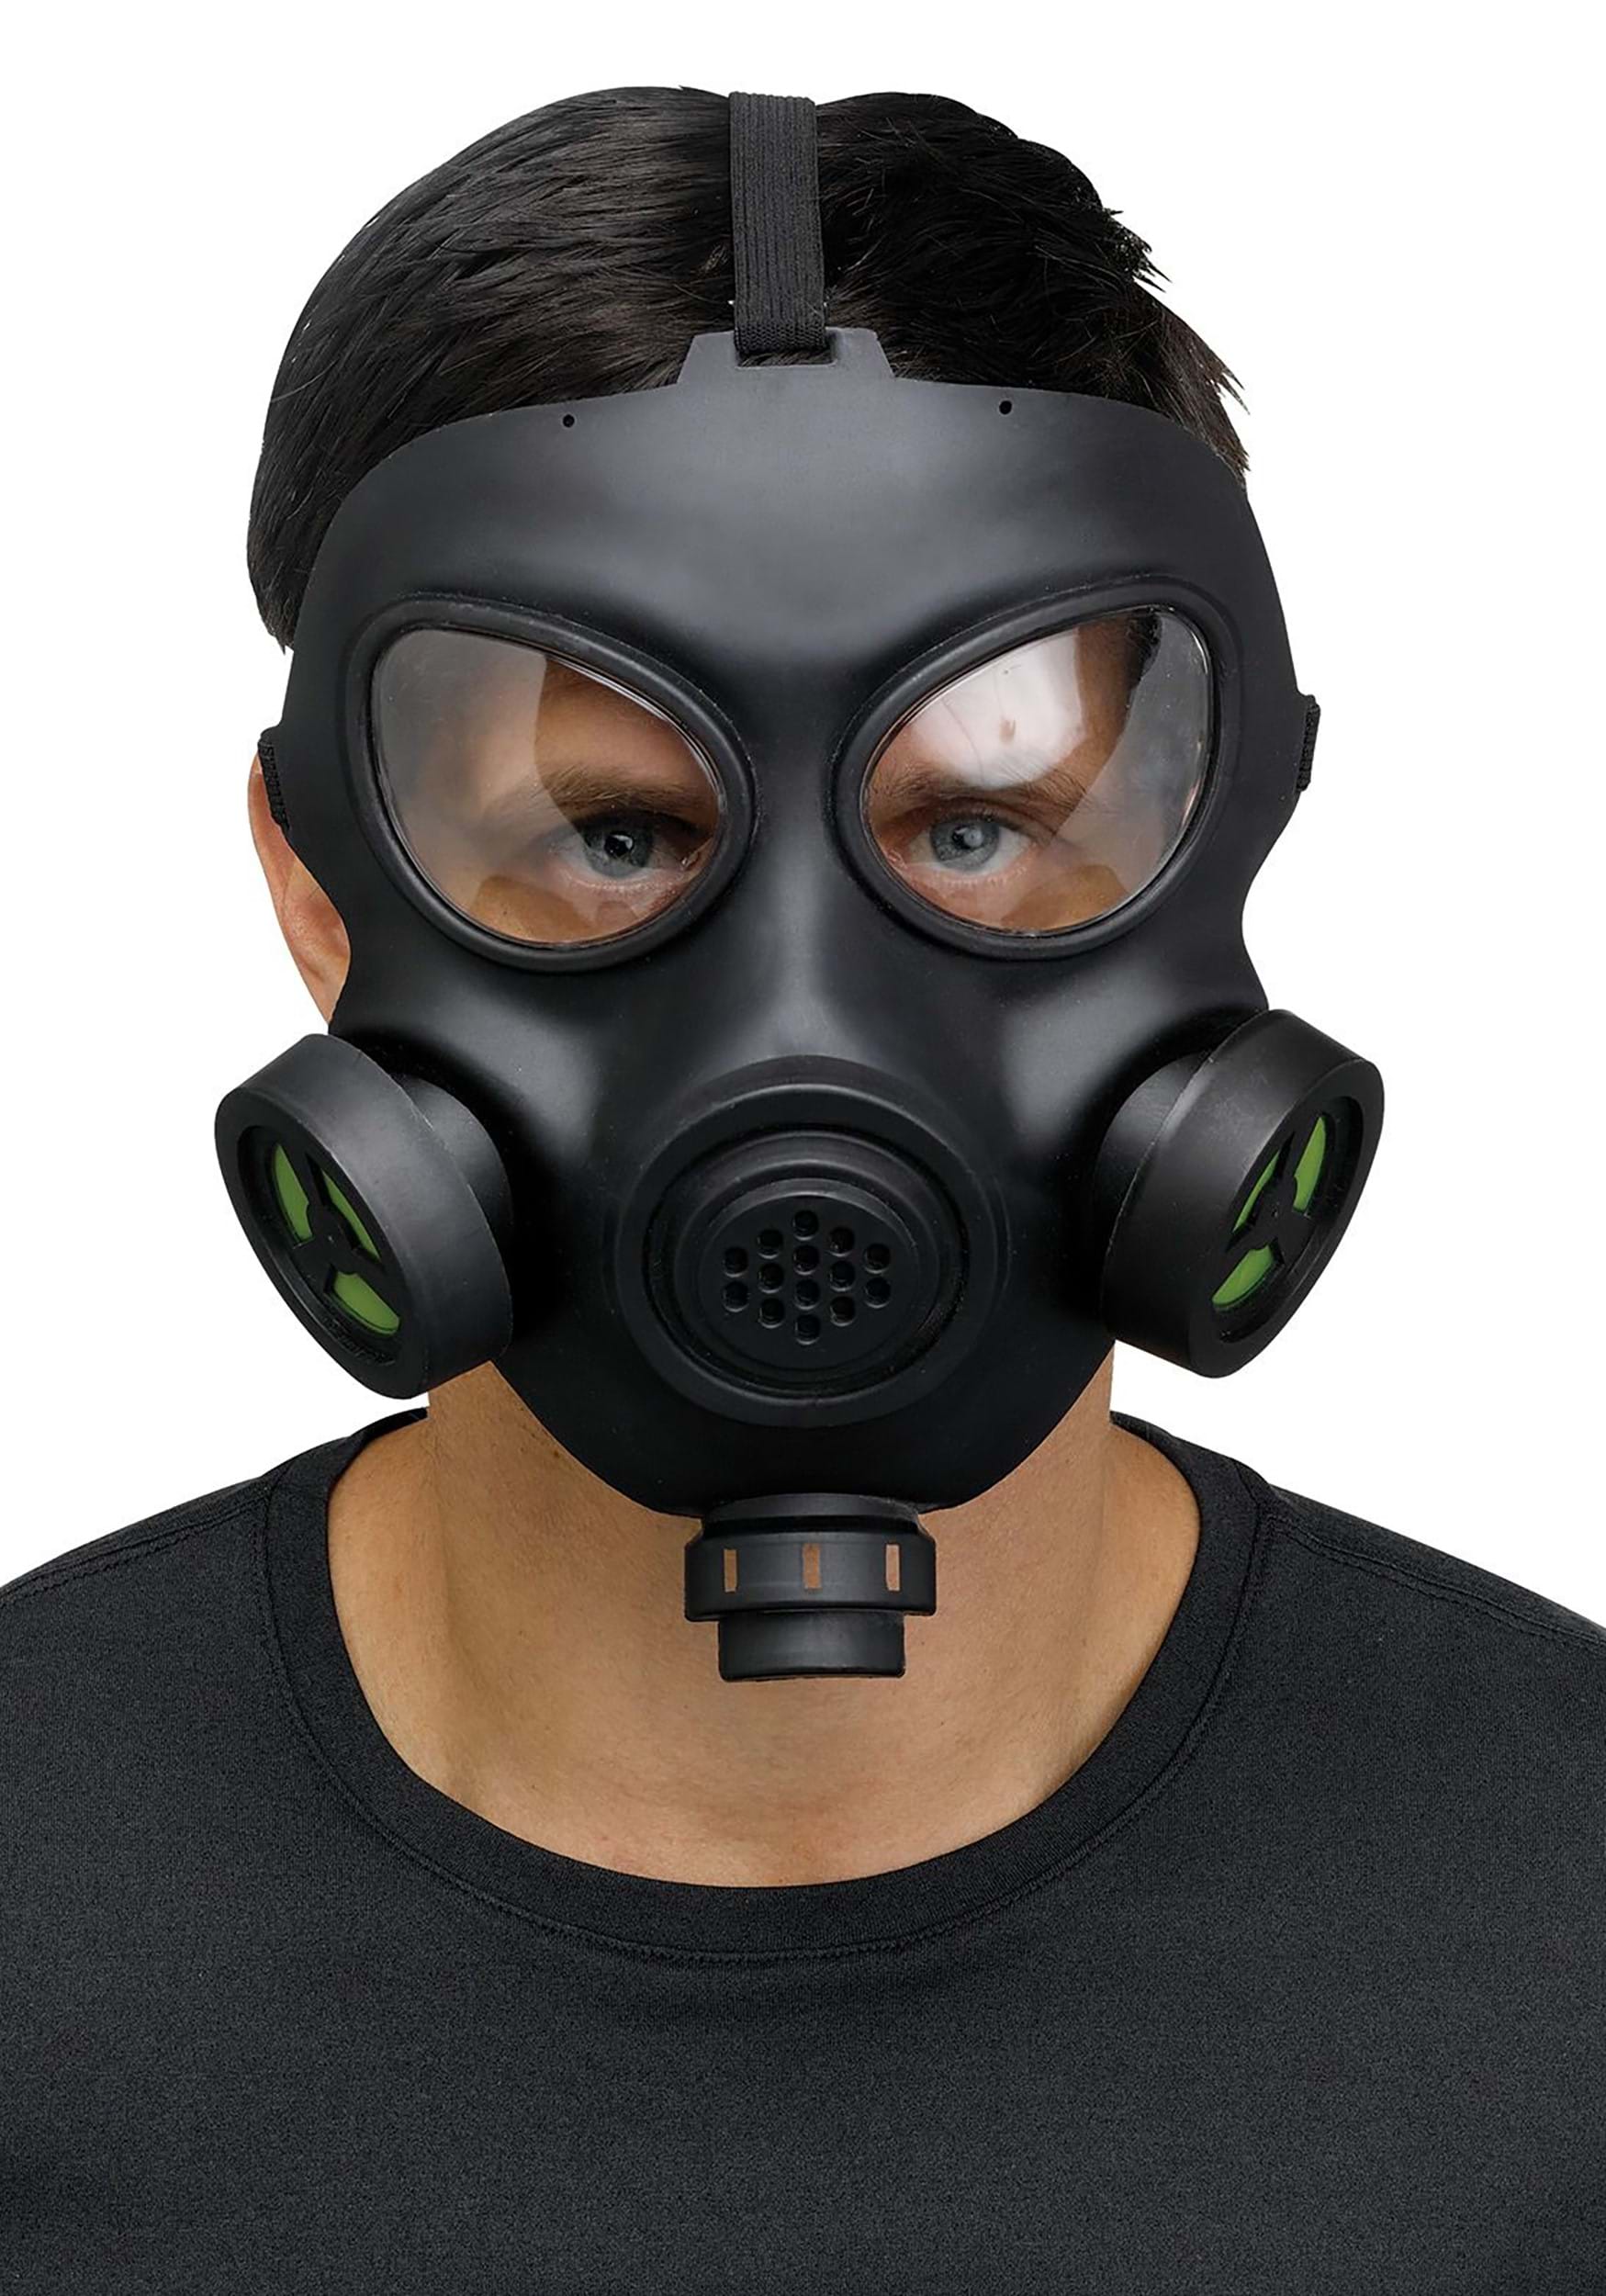 https://images.halloween.com/products/72673/1-1/adult-costume-gas-mask-with-toy-respirator.jpg